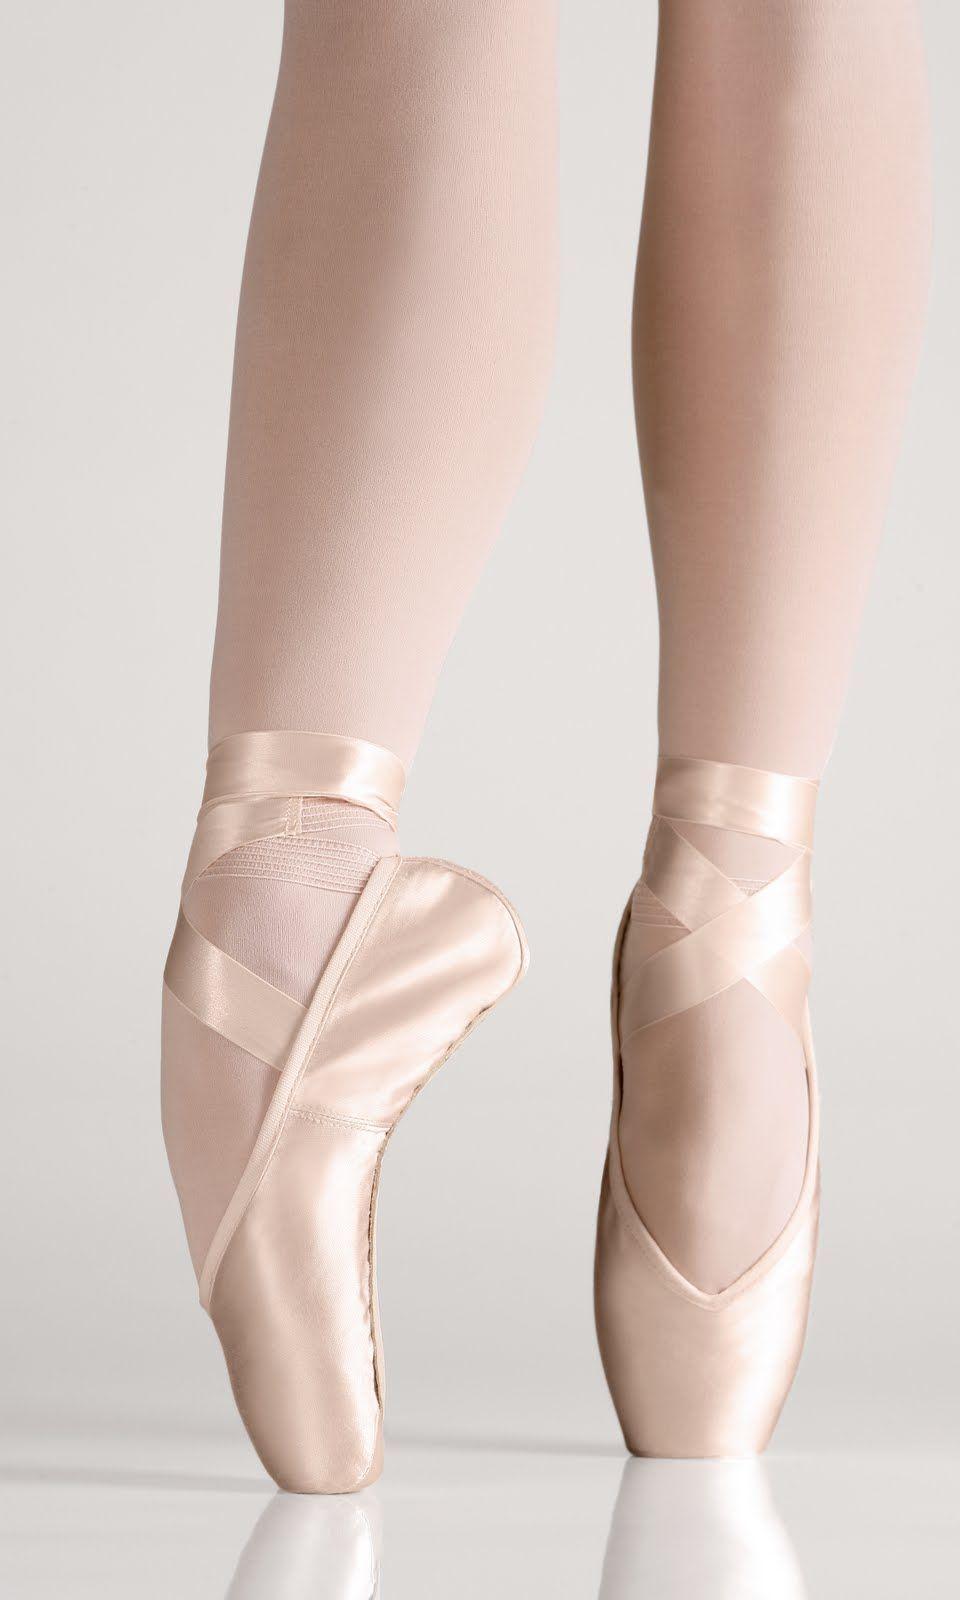 Free Pointe Shoes Cartoon, Download Free Clip Art, Free Clip Art